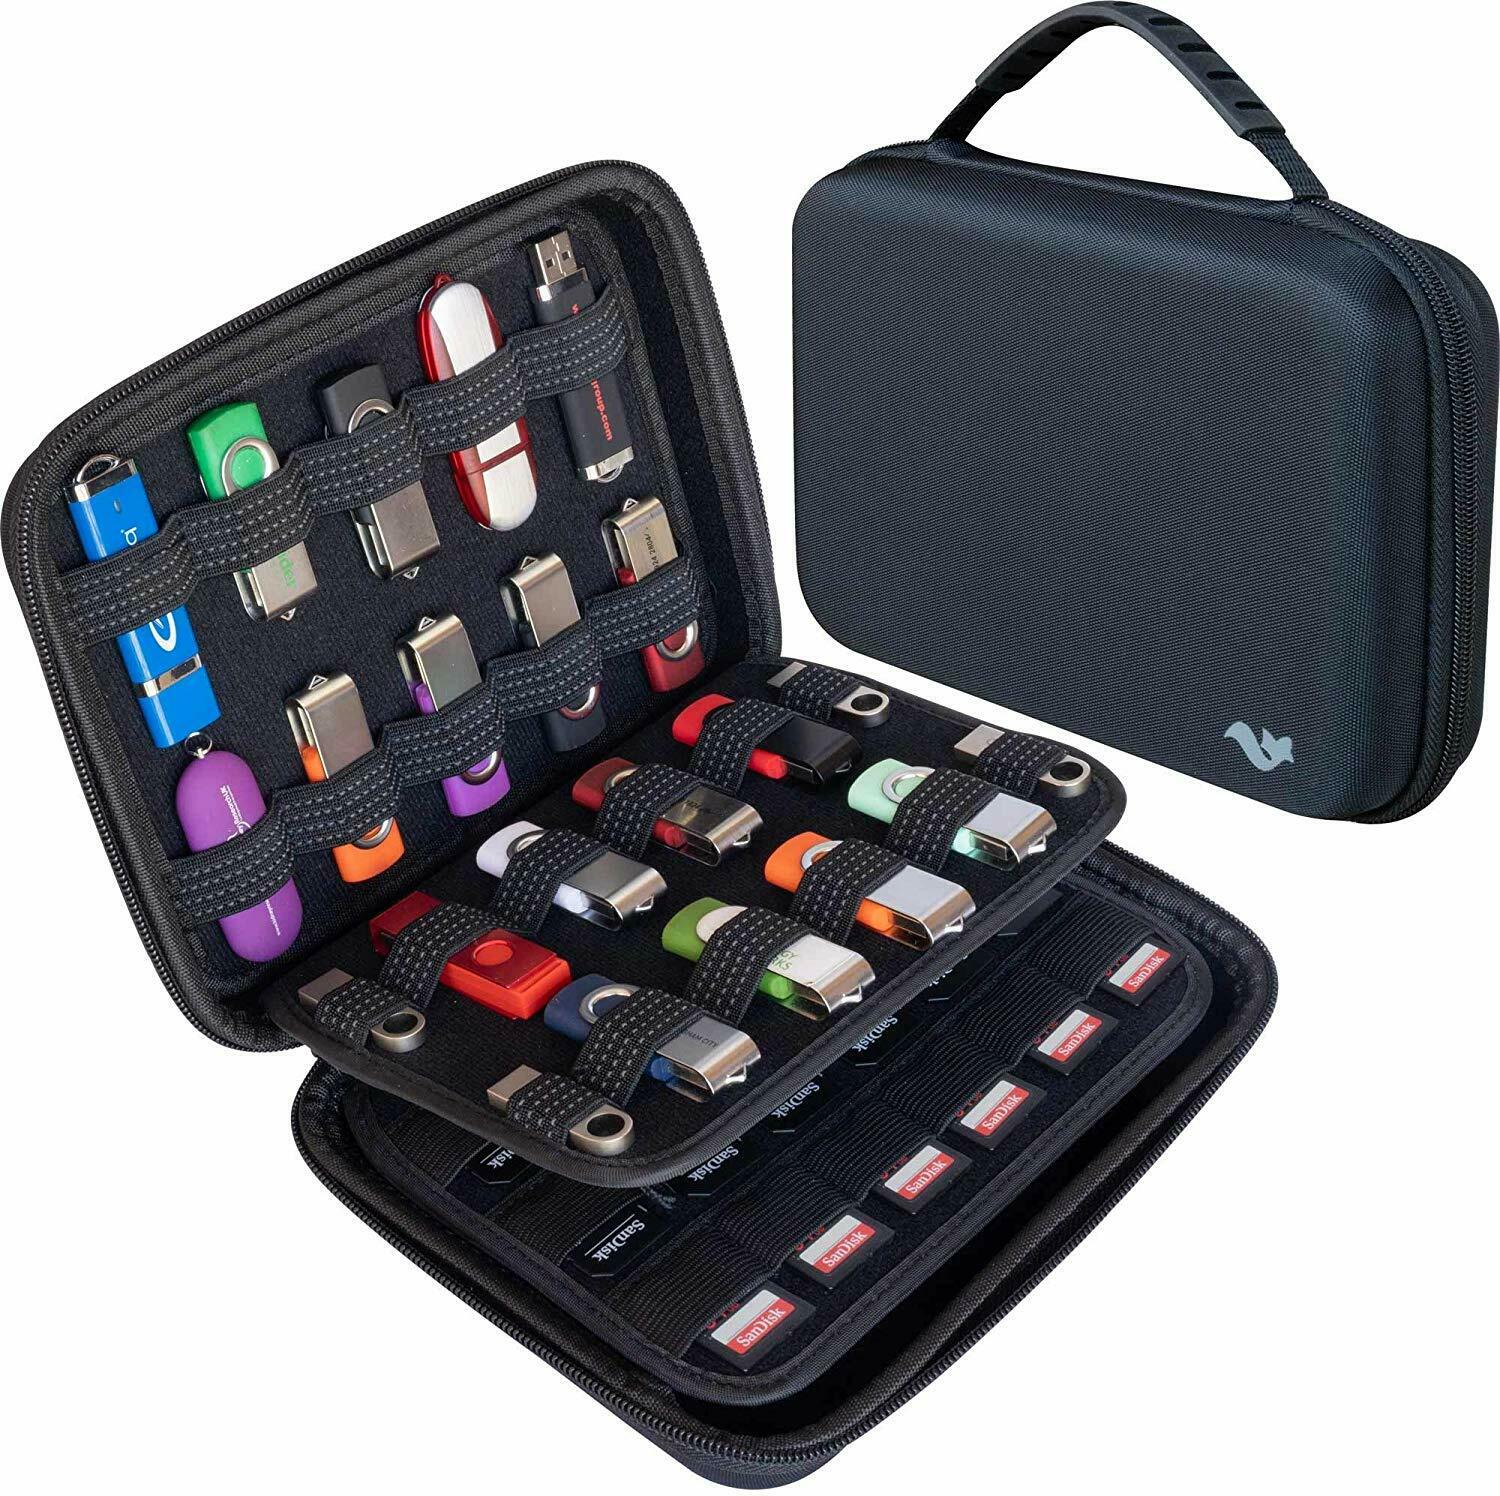 Electronic Accessories Travel Case For Hard Drive, Memory Card/sd Card/usb Pen